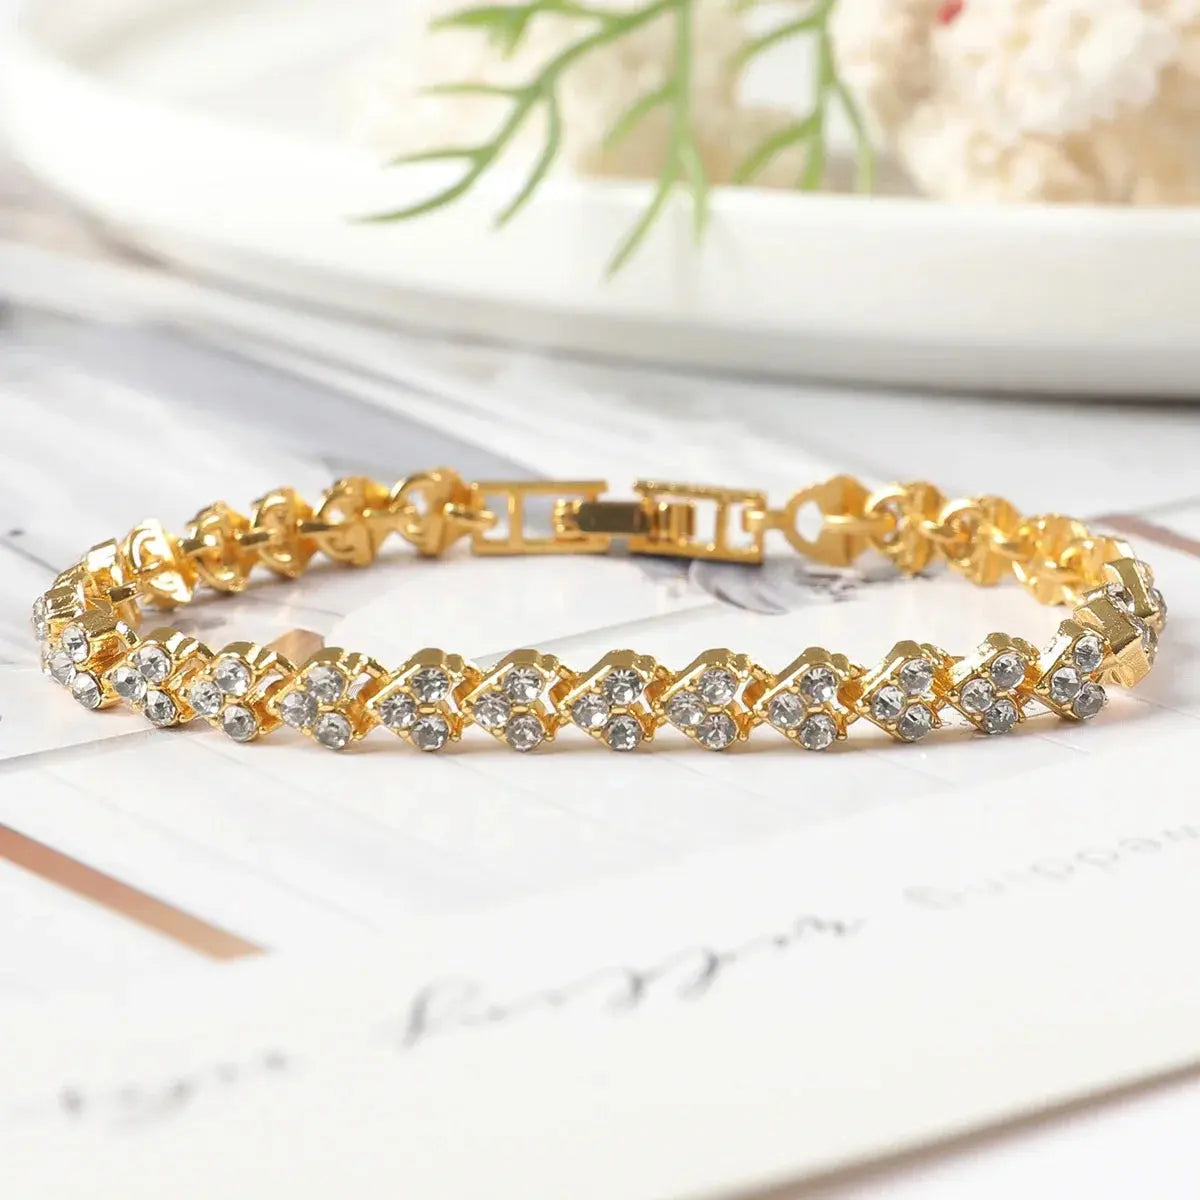 gold bracelet with rhinestones placed in heart shape 